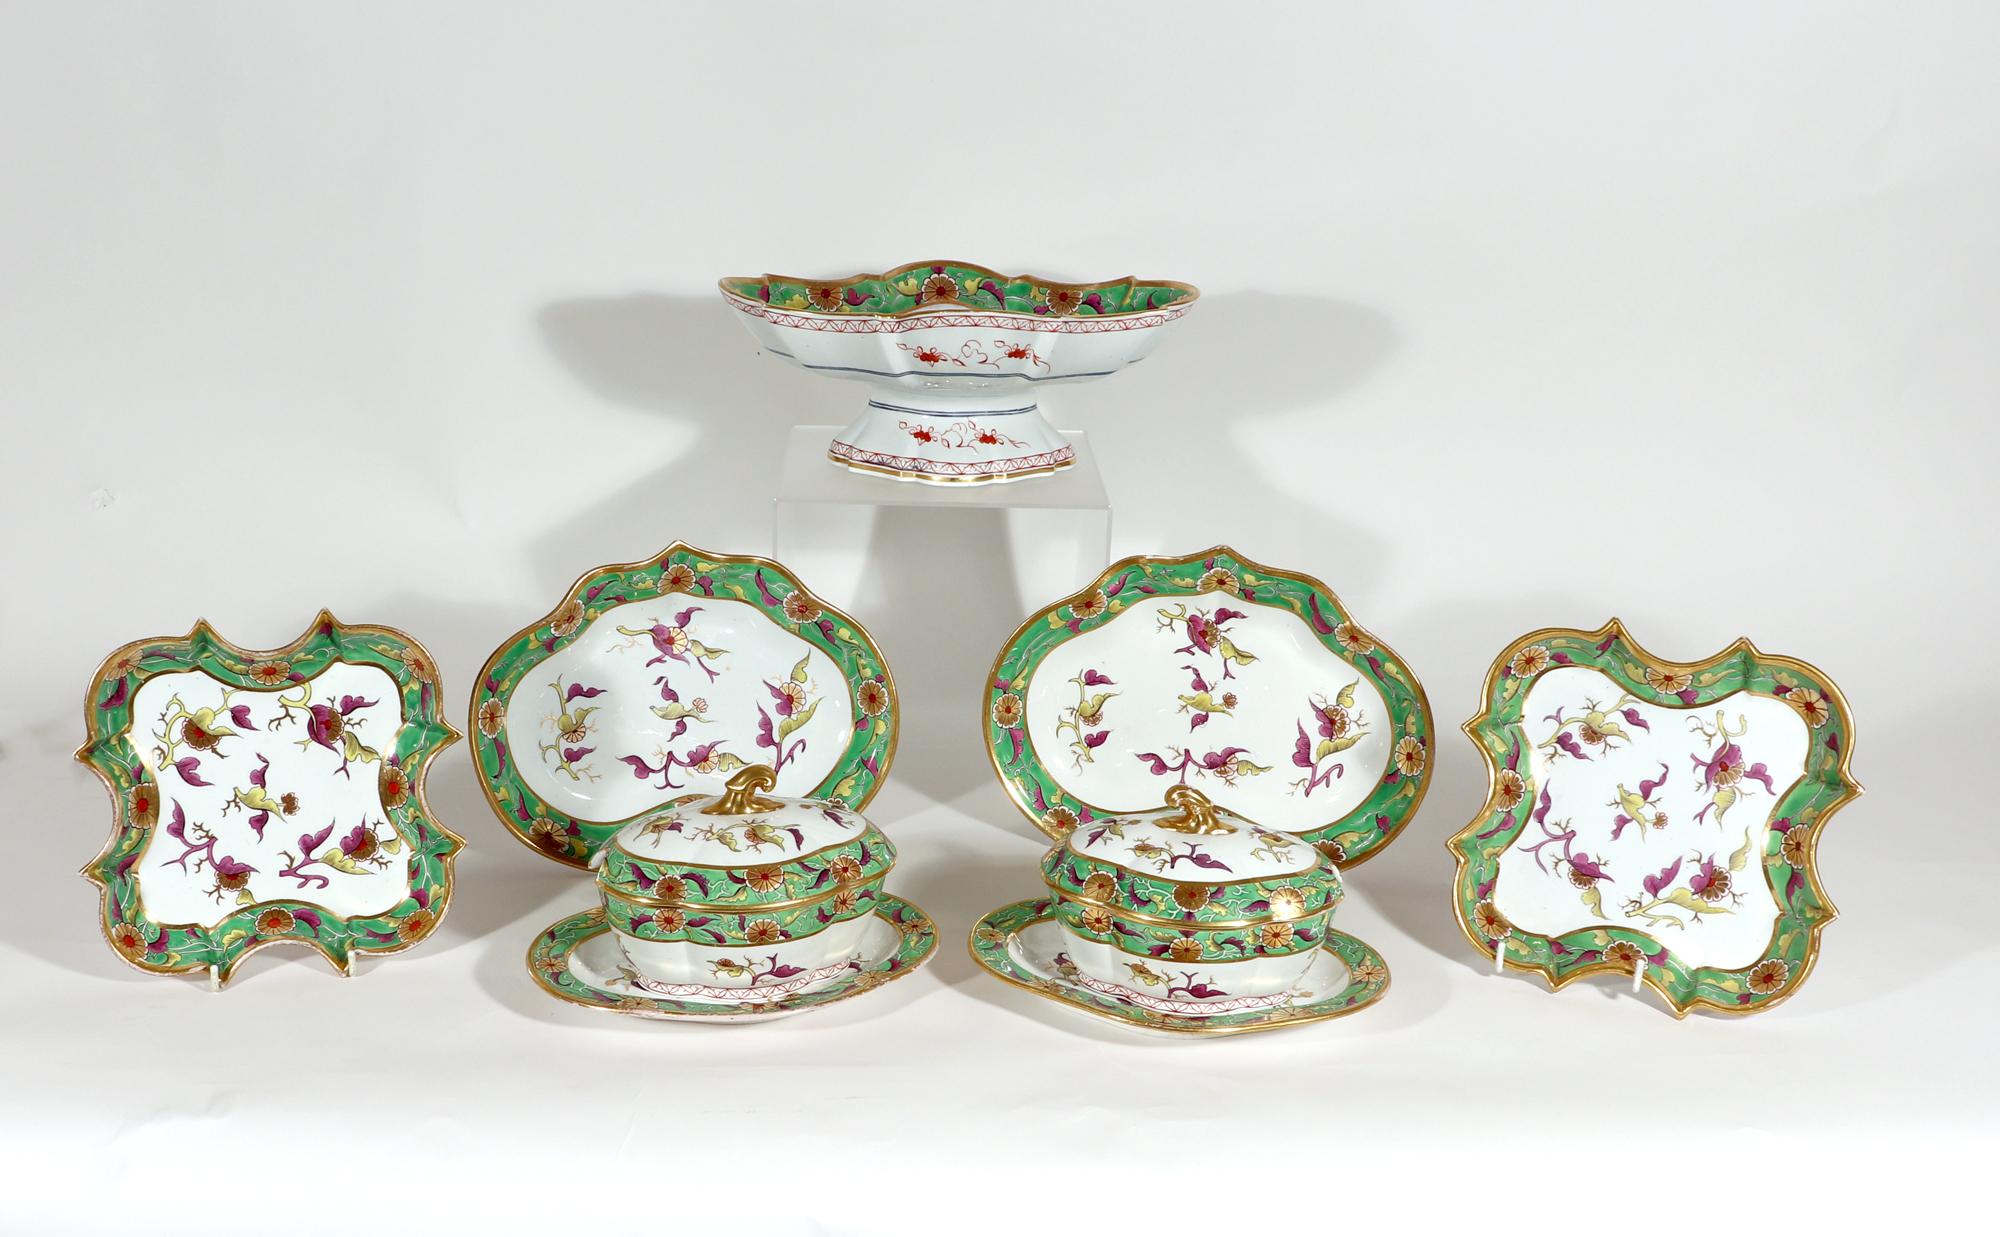 Spode Porcelain Dessert Service, Pattern # 302, Thirty Two Pieces 11